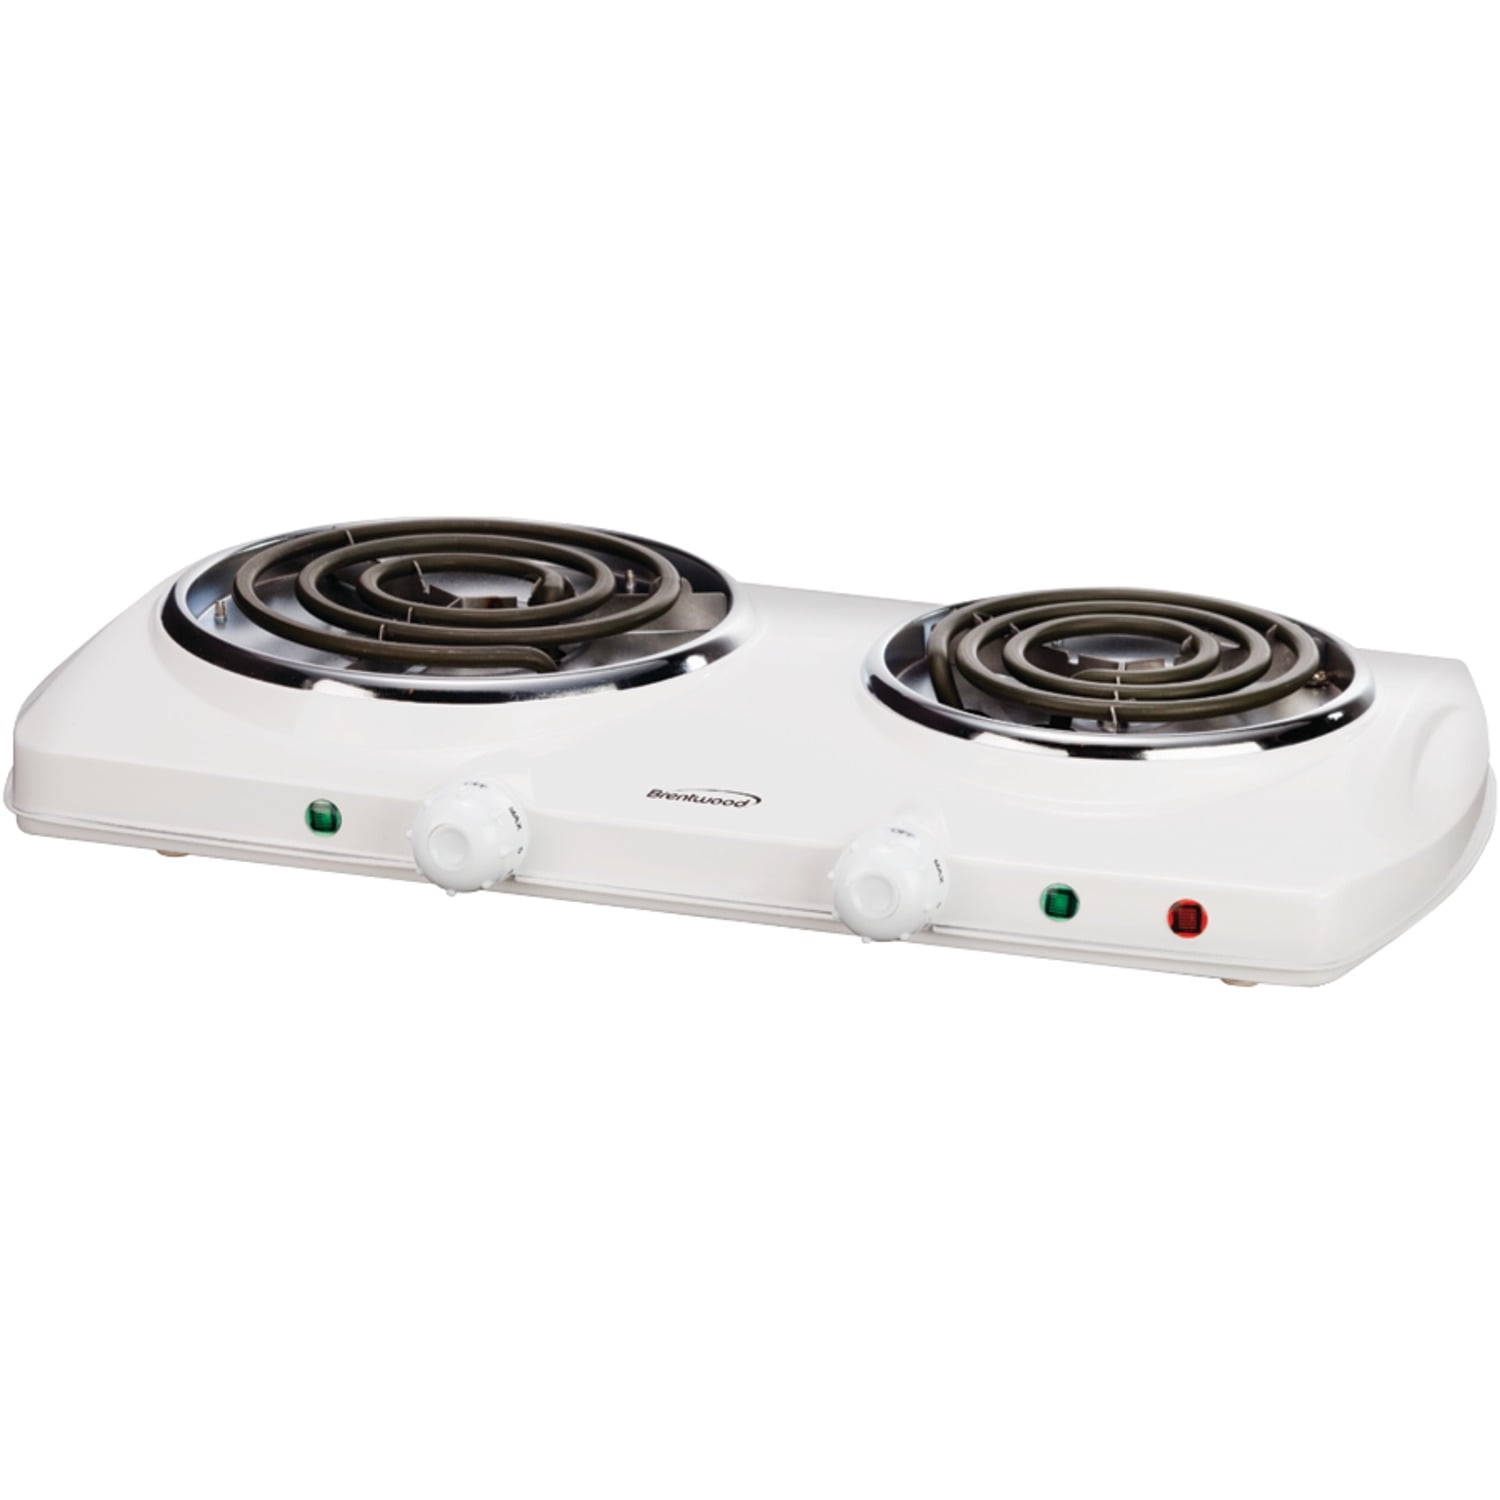 Brentwood Select TS-382 1800w Double Infrared Electric Countertop Burn -  Brentwood Appliances